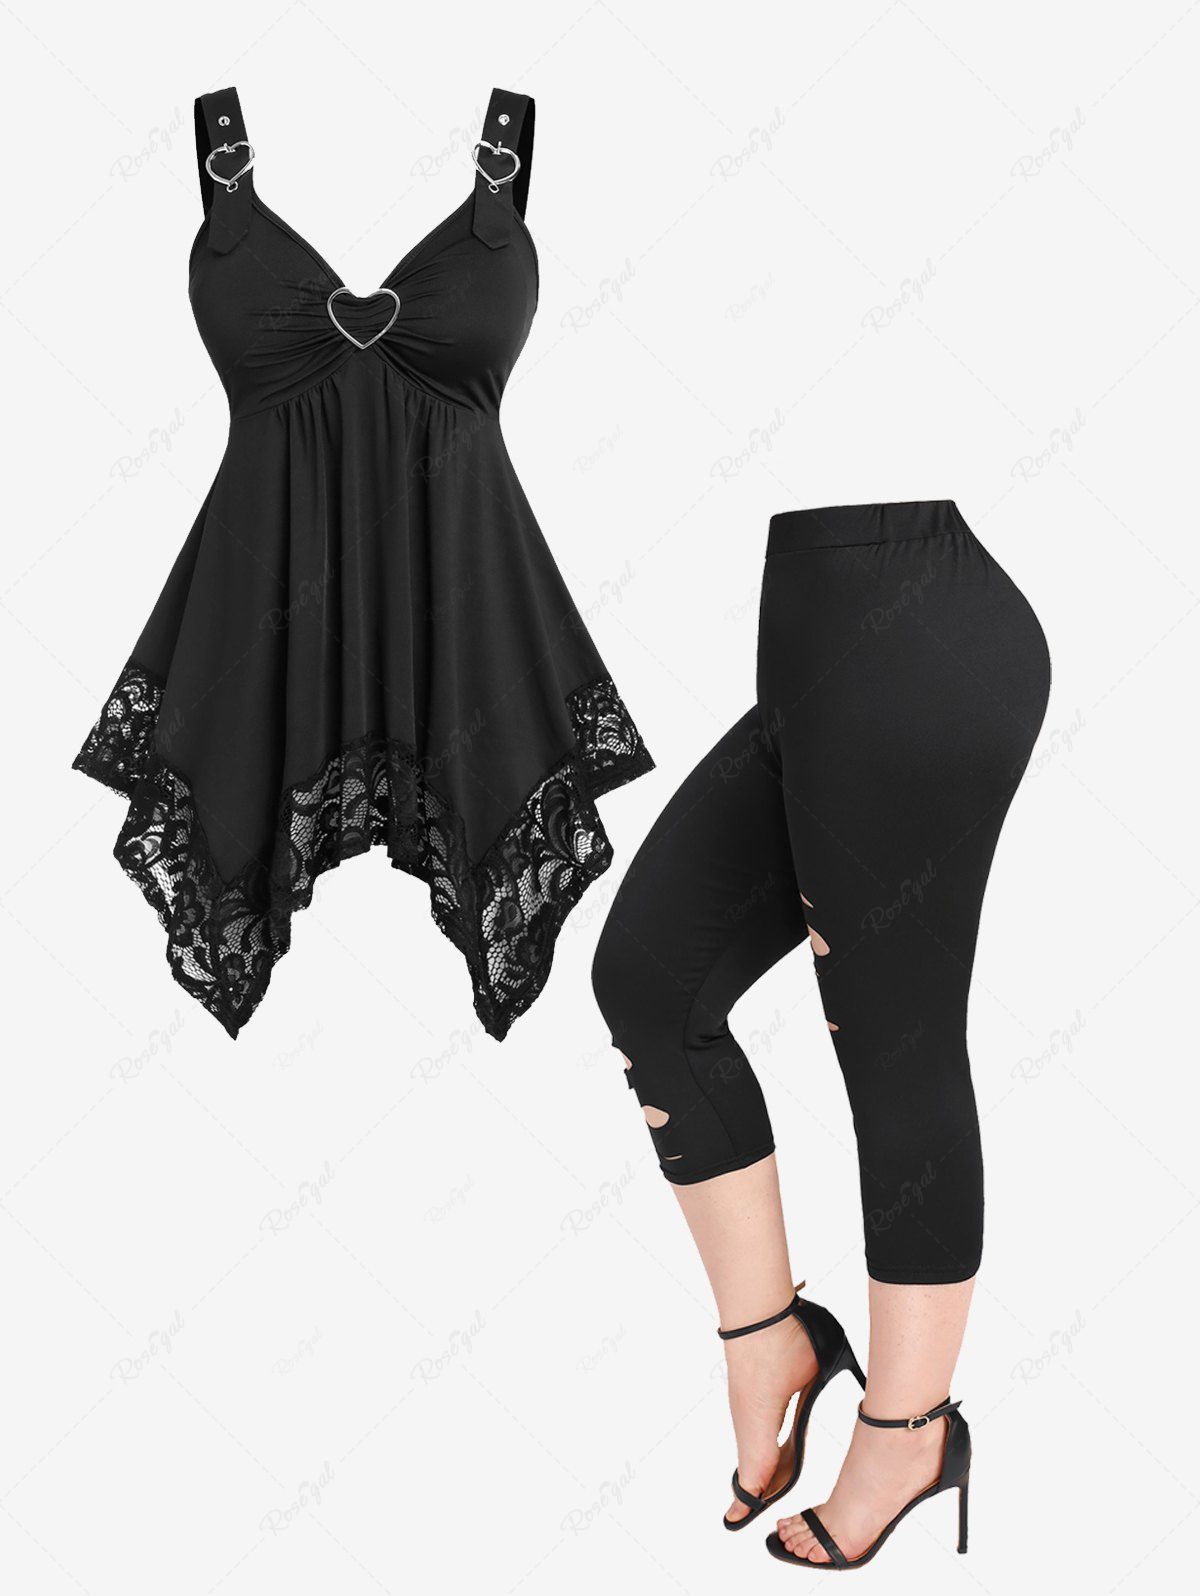 New Lace Panel Heart-ring Buckles Hanky Hem Tank Top and Cutout Leggings Plus Size Outfit  